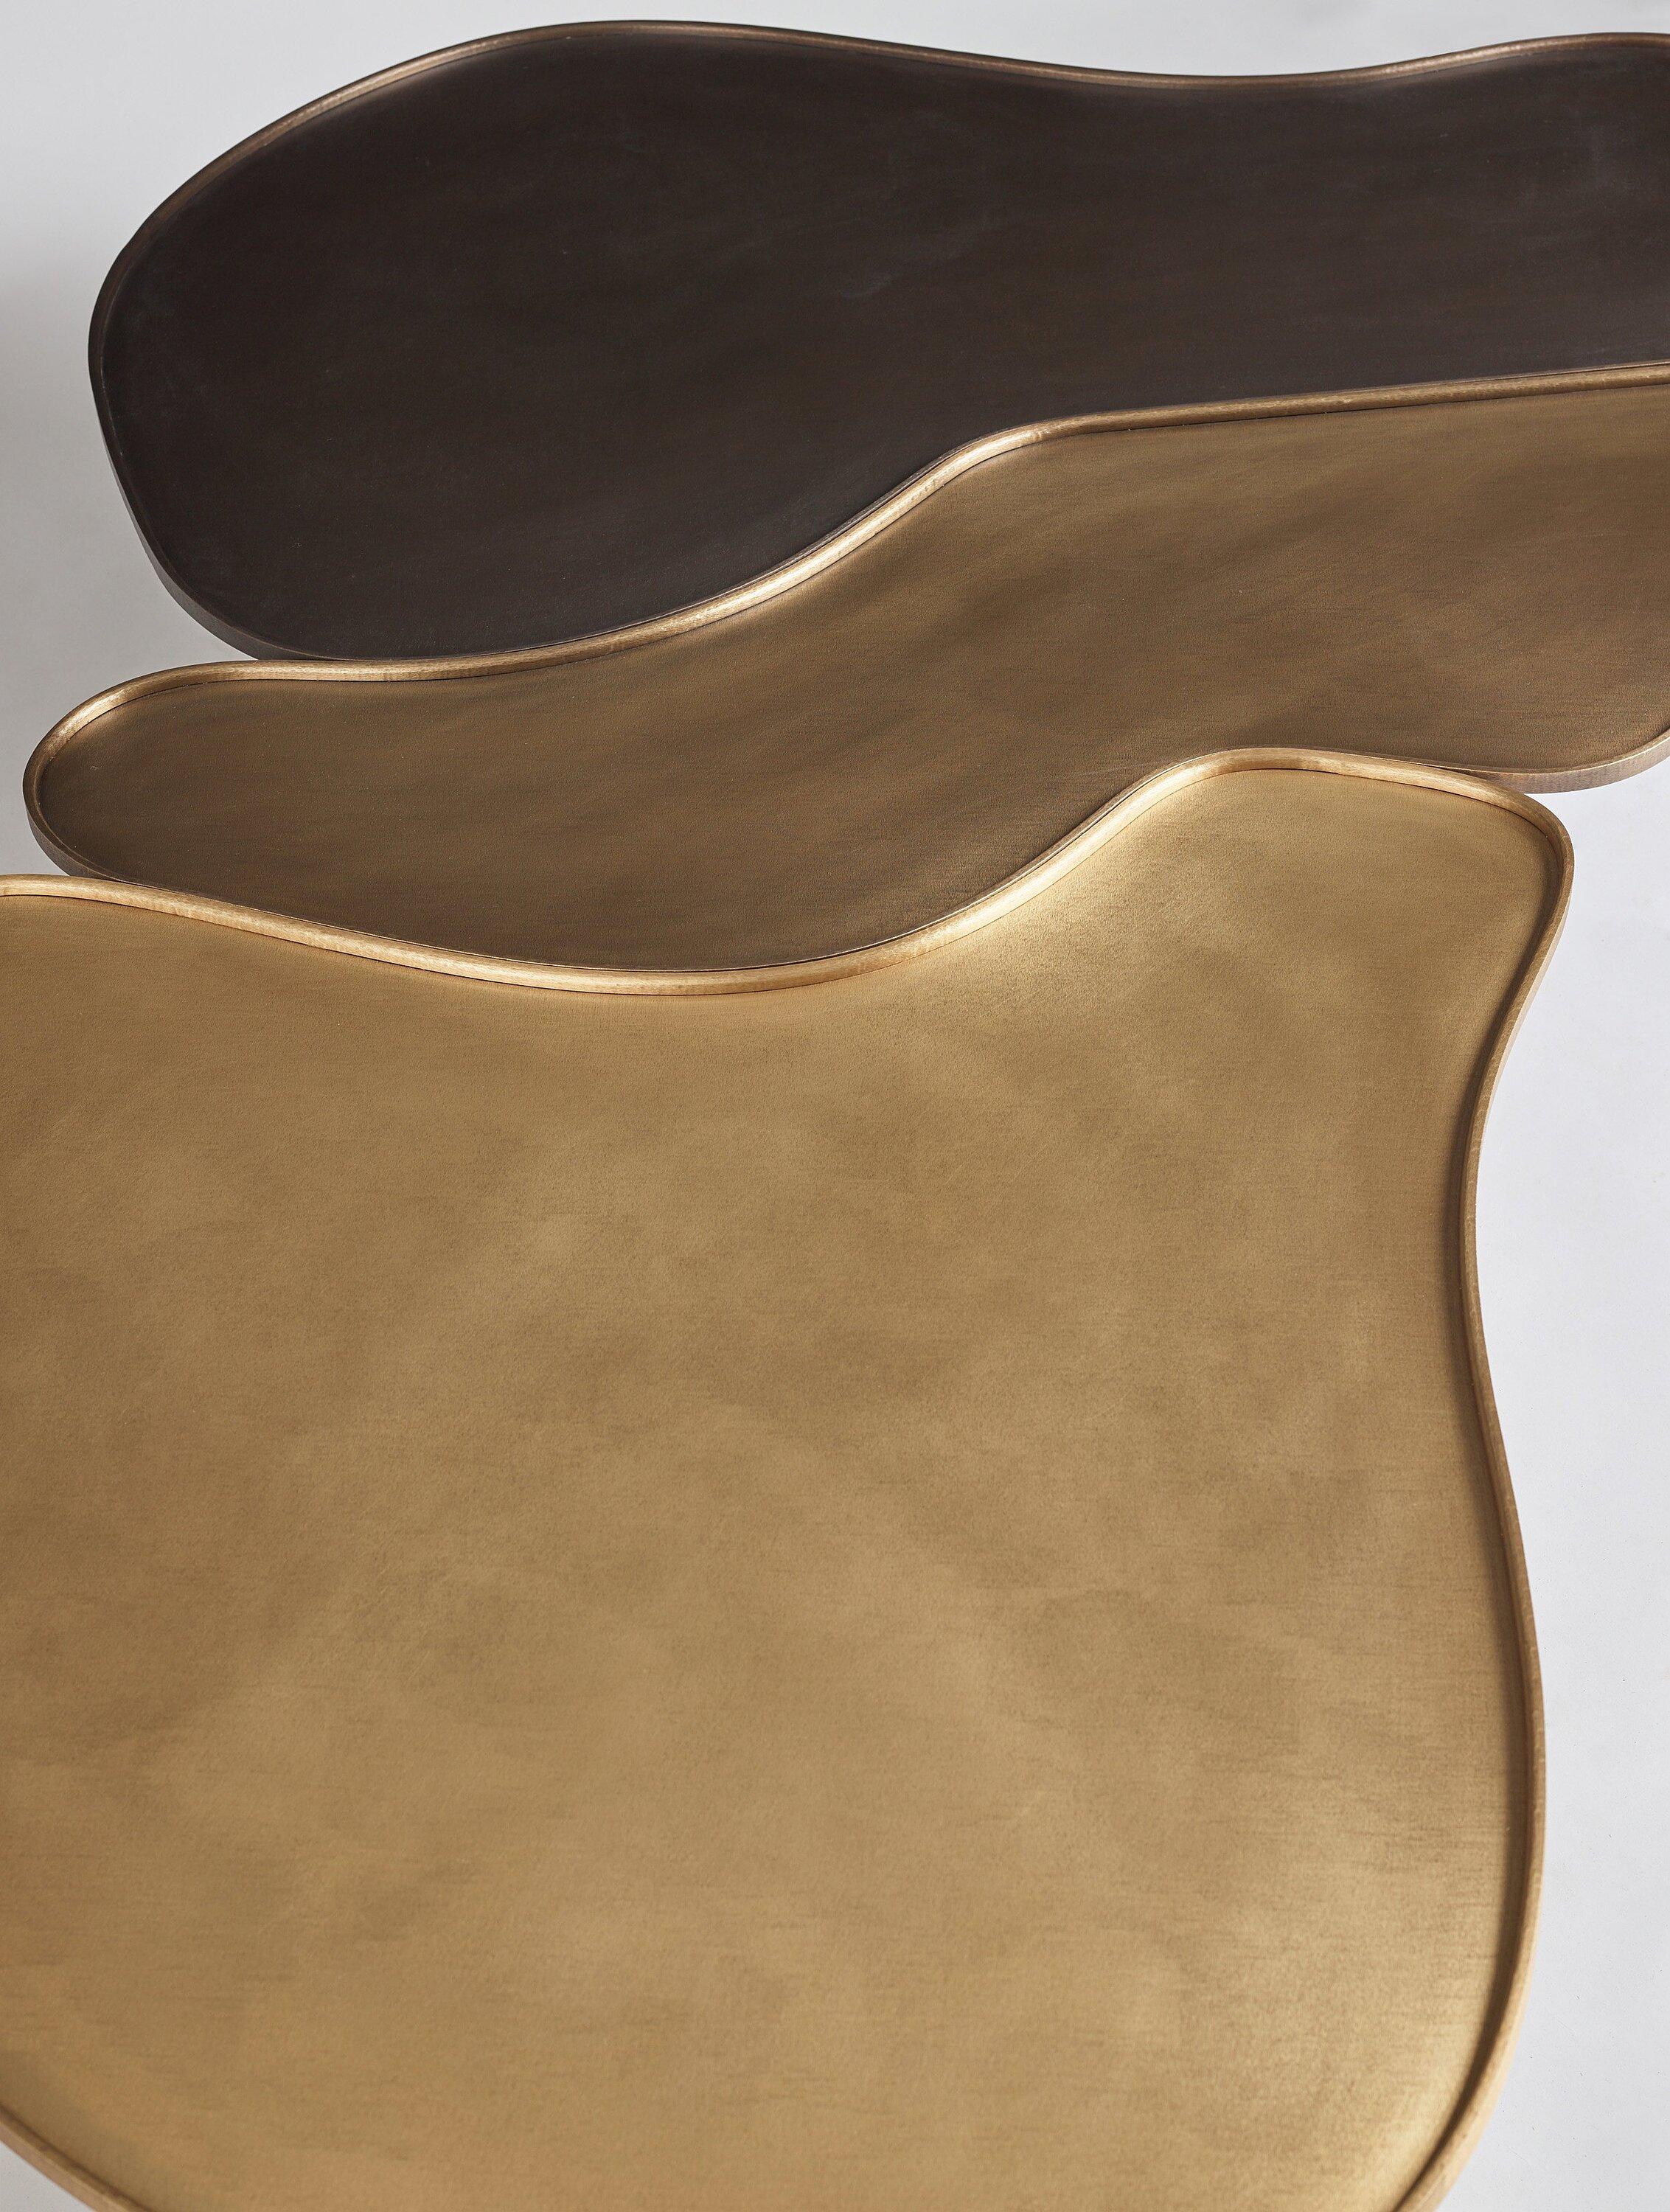 A three toned bronze coffee table designed by Bruno Moinard. Called the 